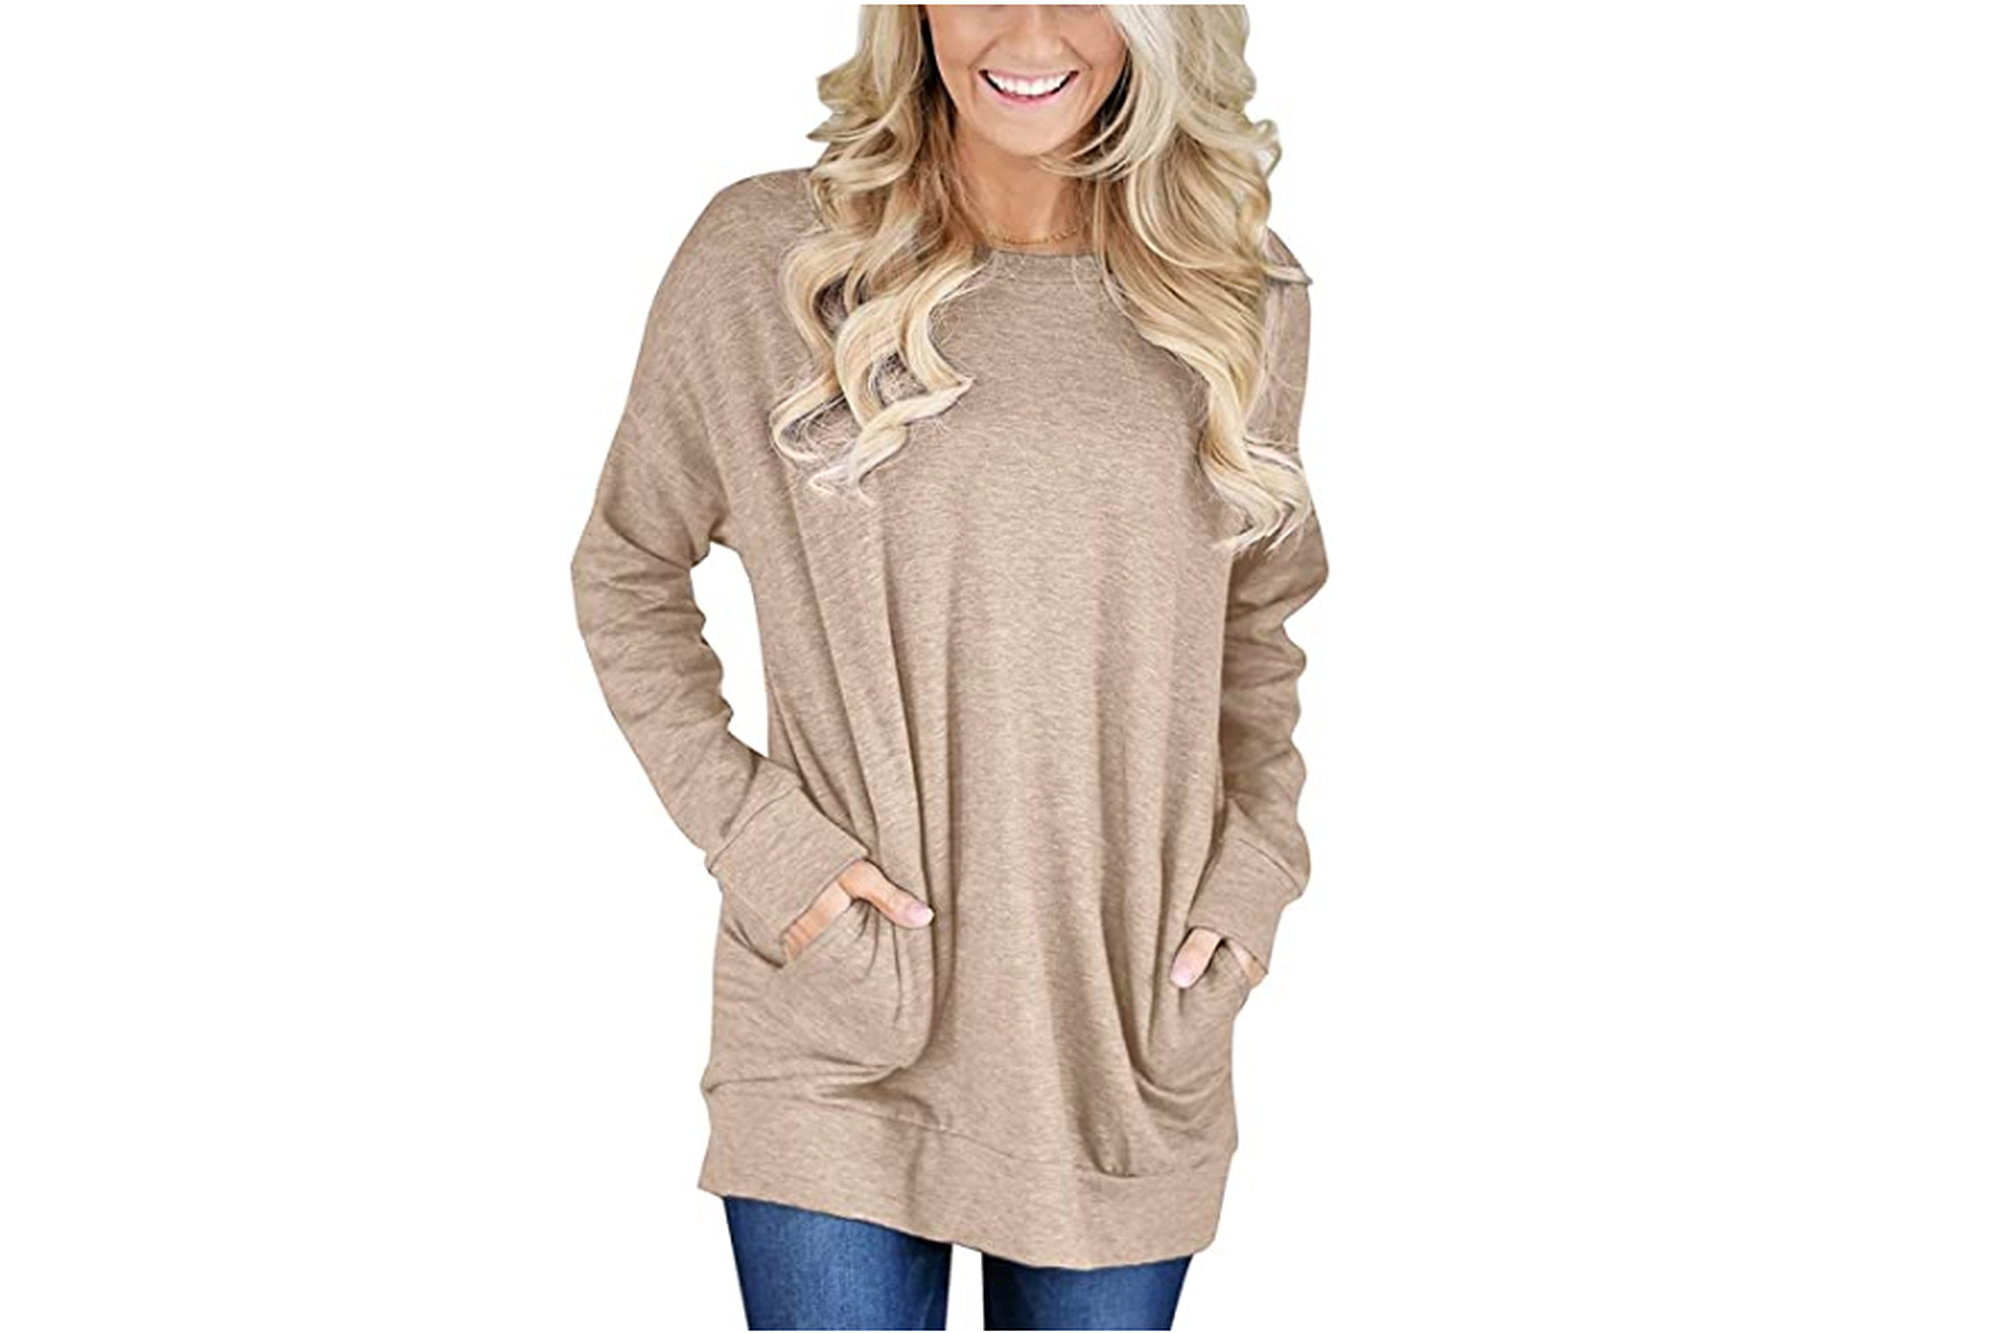 Bingerlily Womens Casual Long Sleeve Tunic Tops Crew Neck Color Block Blouses